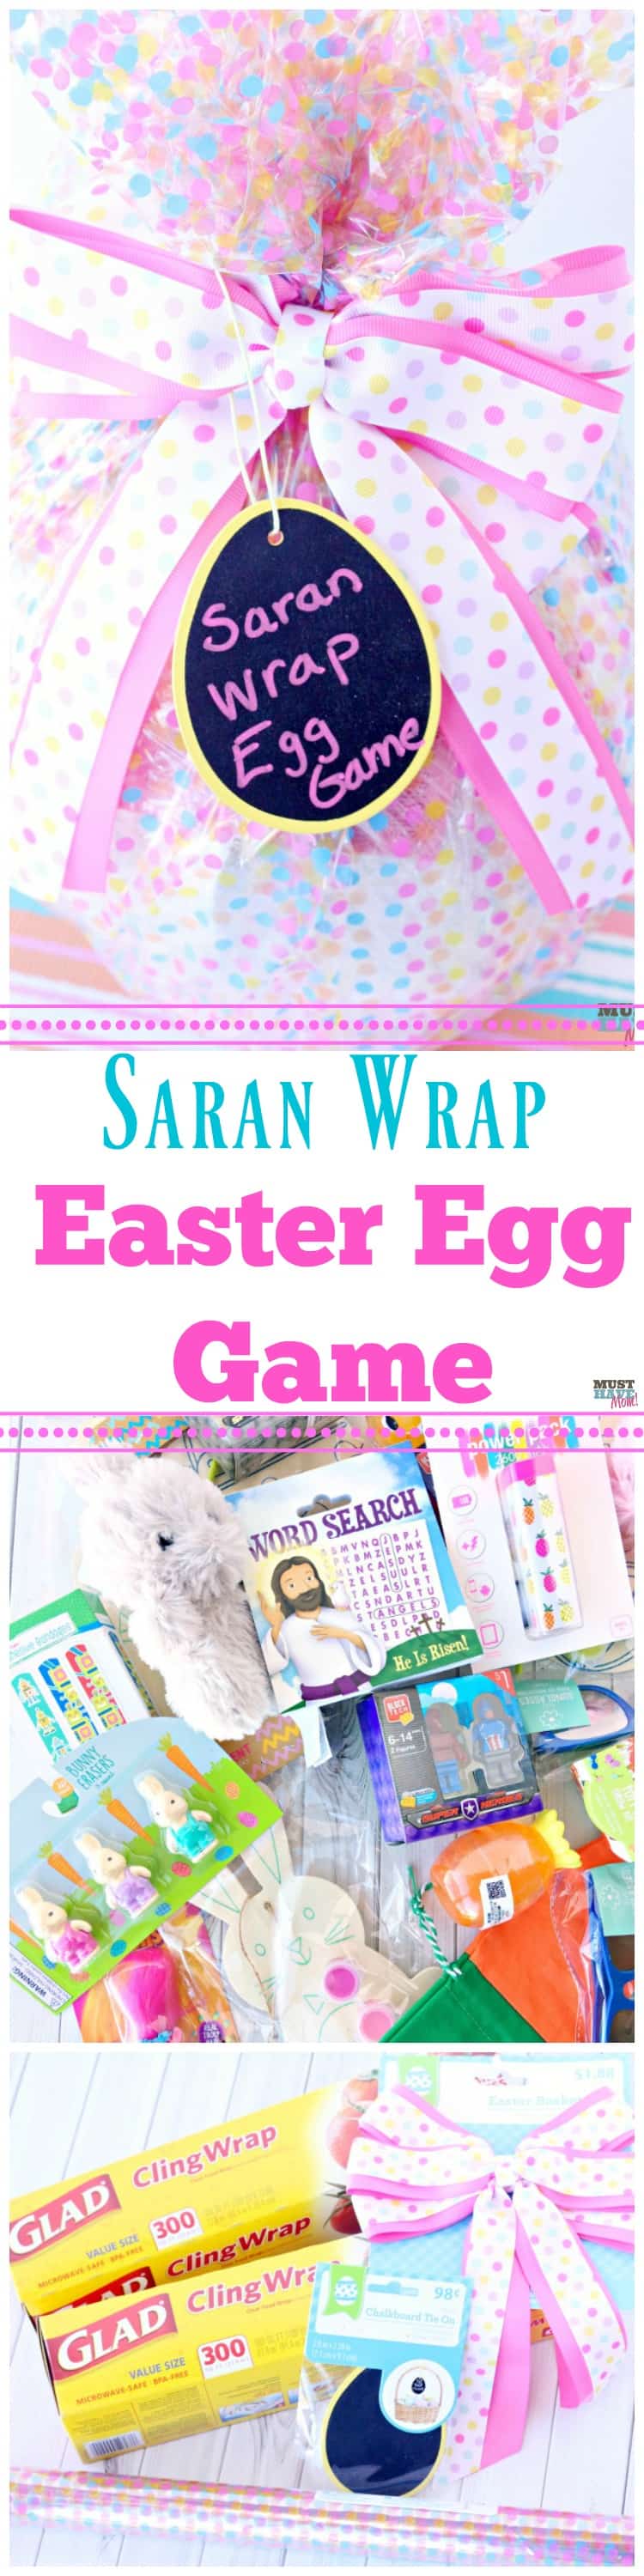 Easter egg saran wrap game idea! Start a new Easter tradition with this spin on the popular saran wrap ball game!